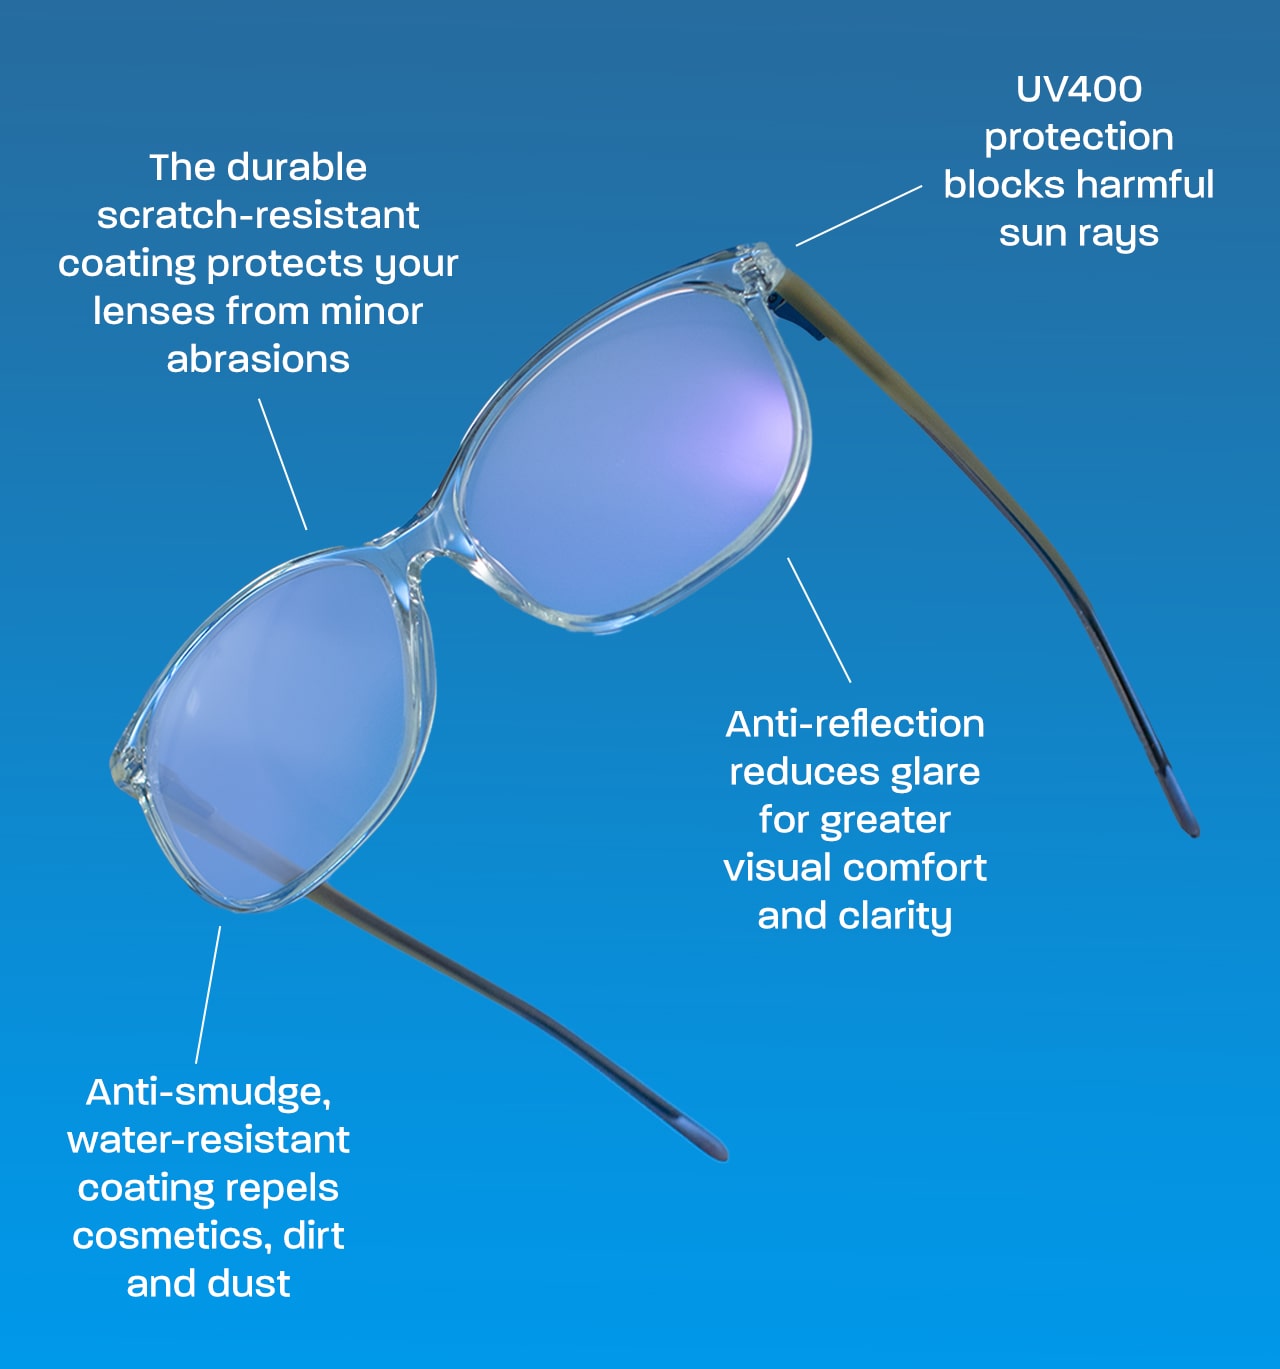 The durable scratch-resistant coating protects your lenses from minor abrasions. Anti-smudge, water-resistant coating repels cosmetics, dirt and dust. Anti-reflection reduces glare for greater visual comfort and clarity. UV400 protection blocks harmful sun rays.